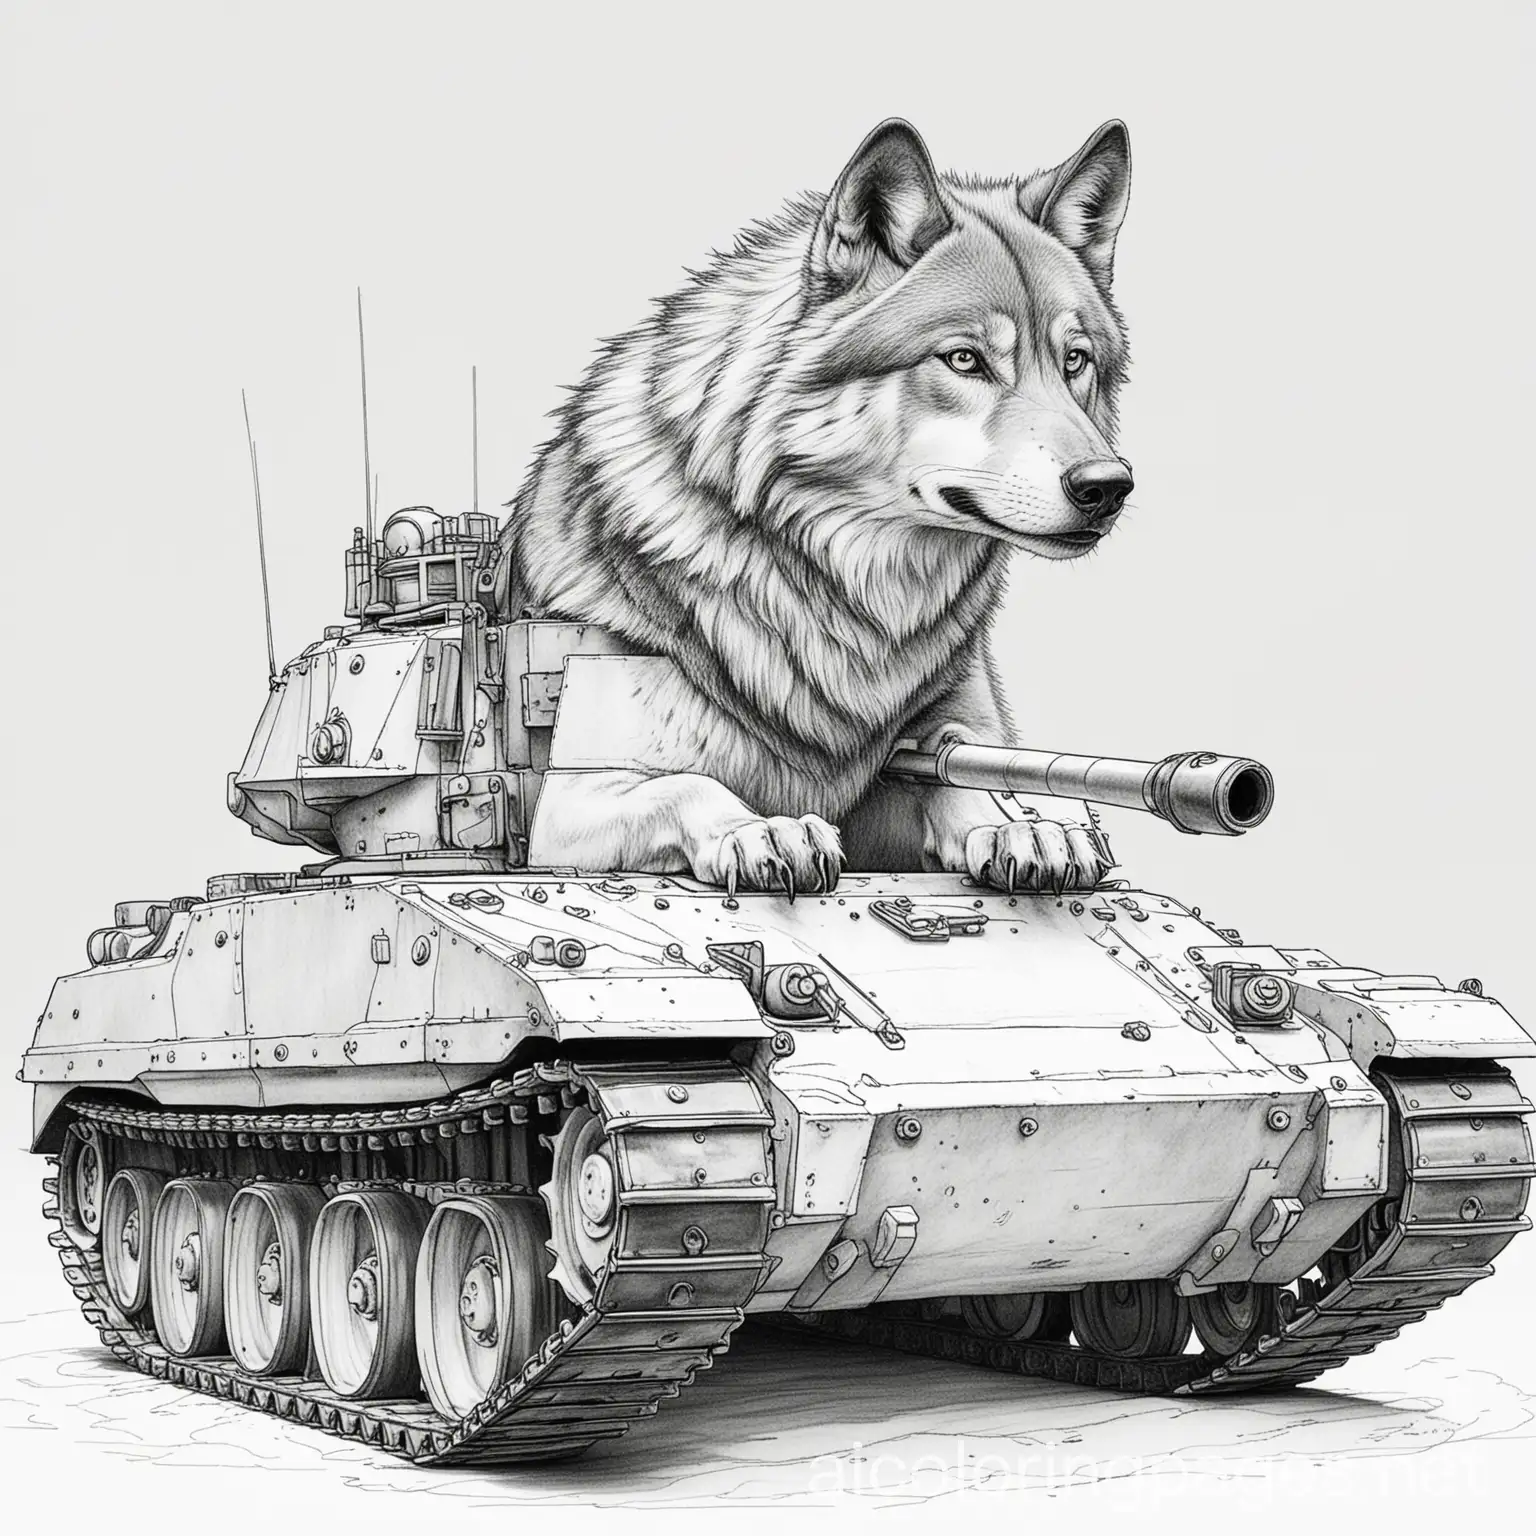 wolf driving a tank, Coloring Page, black and white, line art, white background, Simplicity, Ample White Space. The background of the coloring page is plain white to make it easy for young children to color within the lines. The outlines of all the subjects are easy to distinguish, making it simple for kids to color without too much difficulty